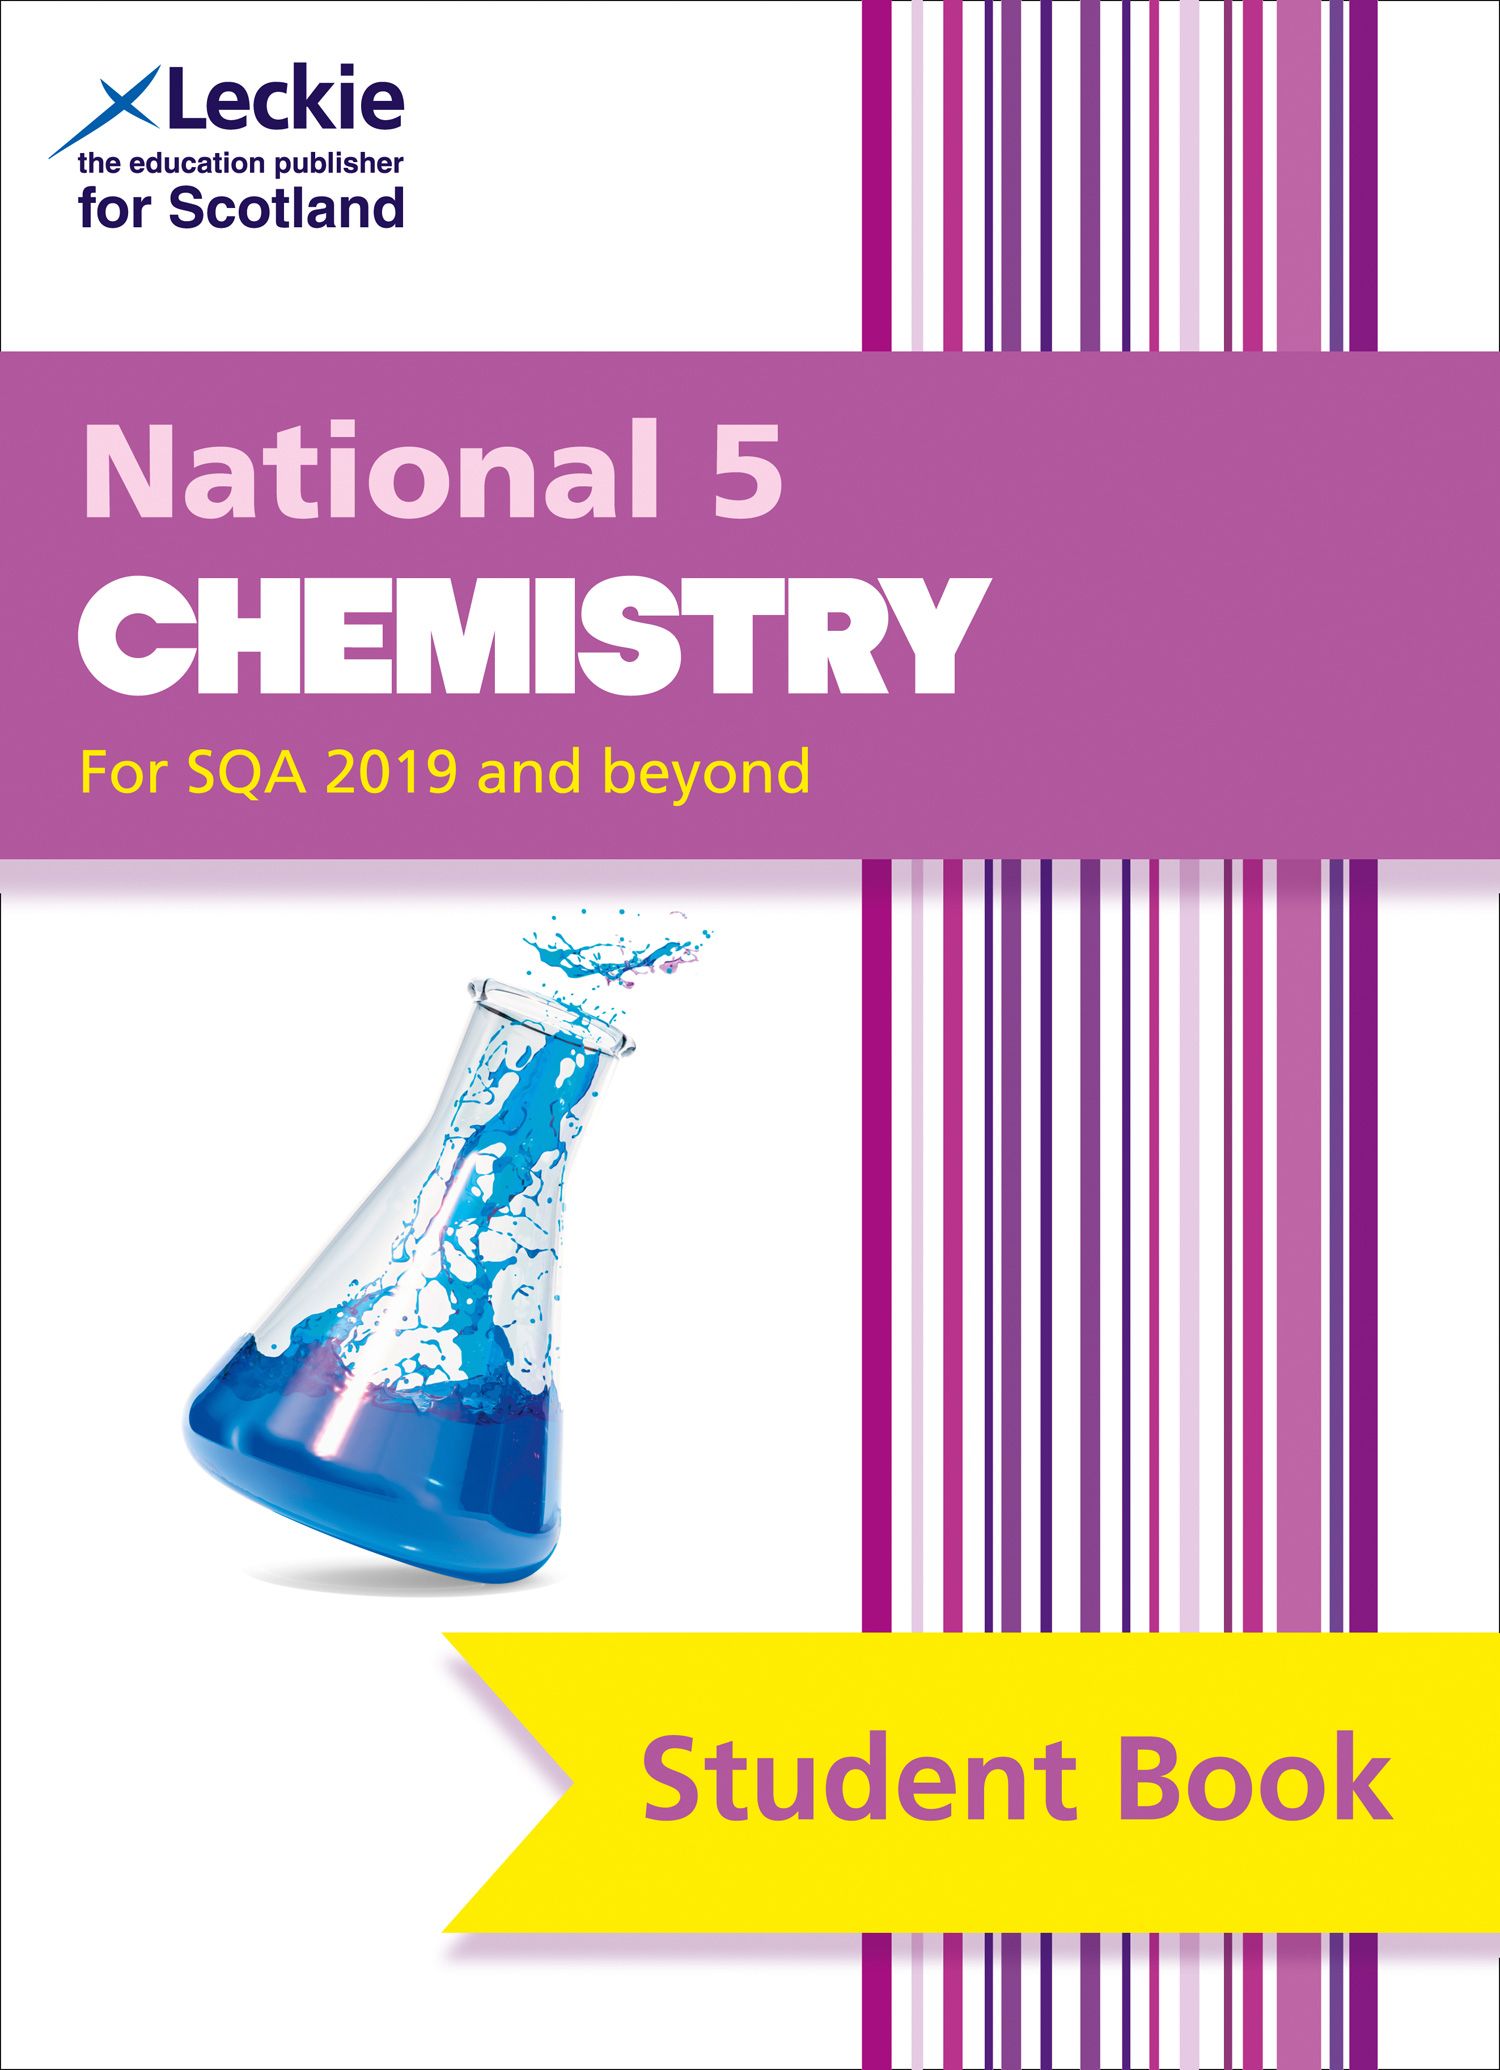 Leckie Student Book - National 5 Chemistry: Comprehensive textbook for the  CfE (Second edition)